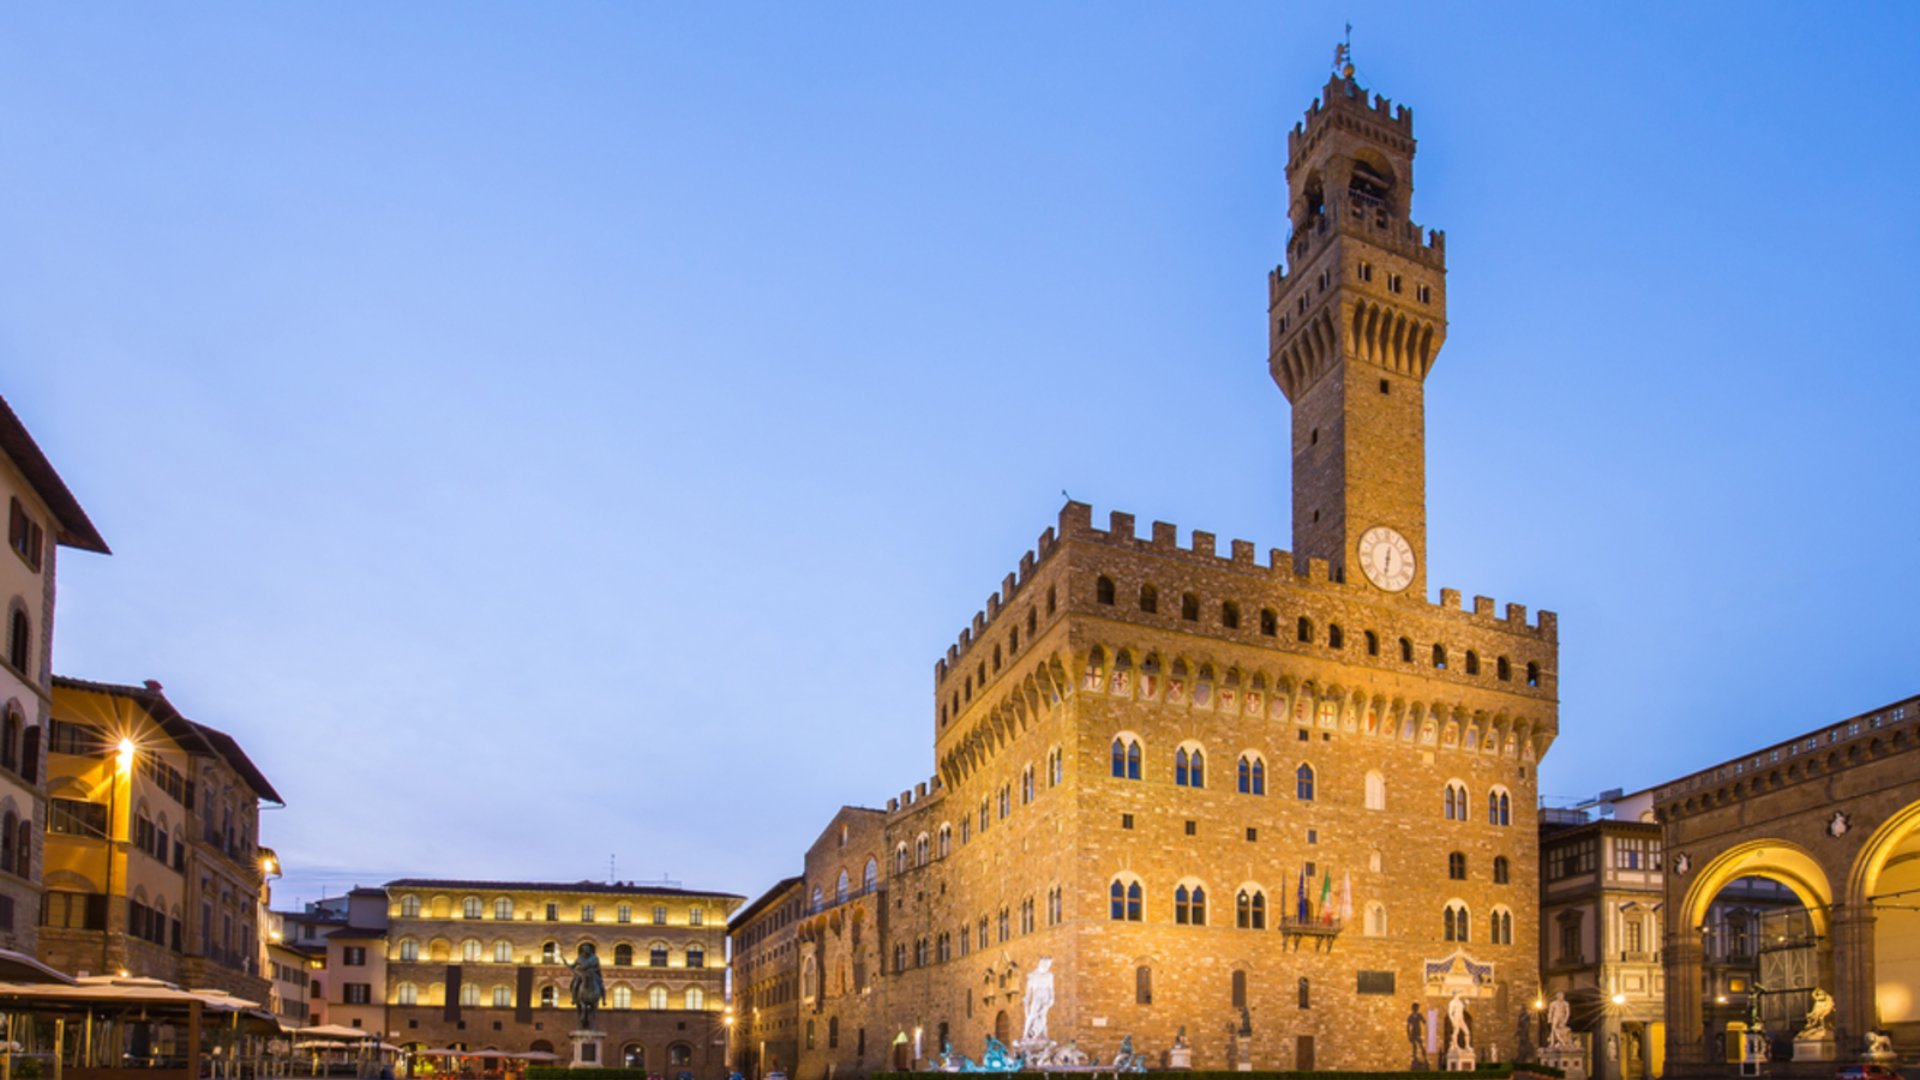 A two-hour tour to discover the secrets of the Medici family, in the heart of Florence